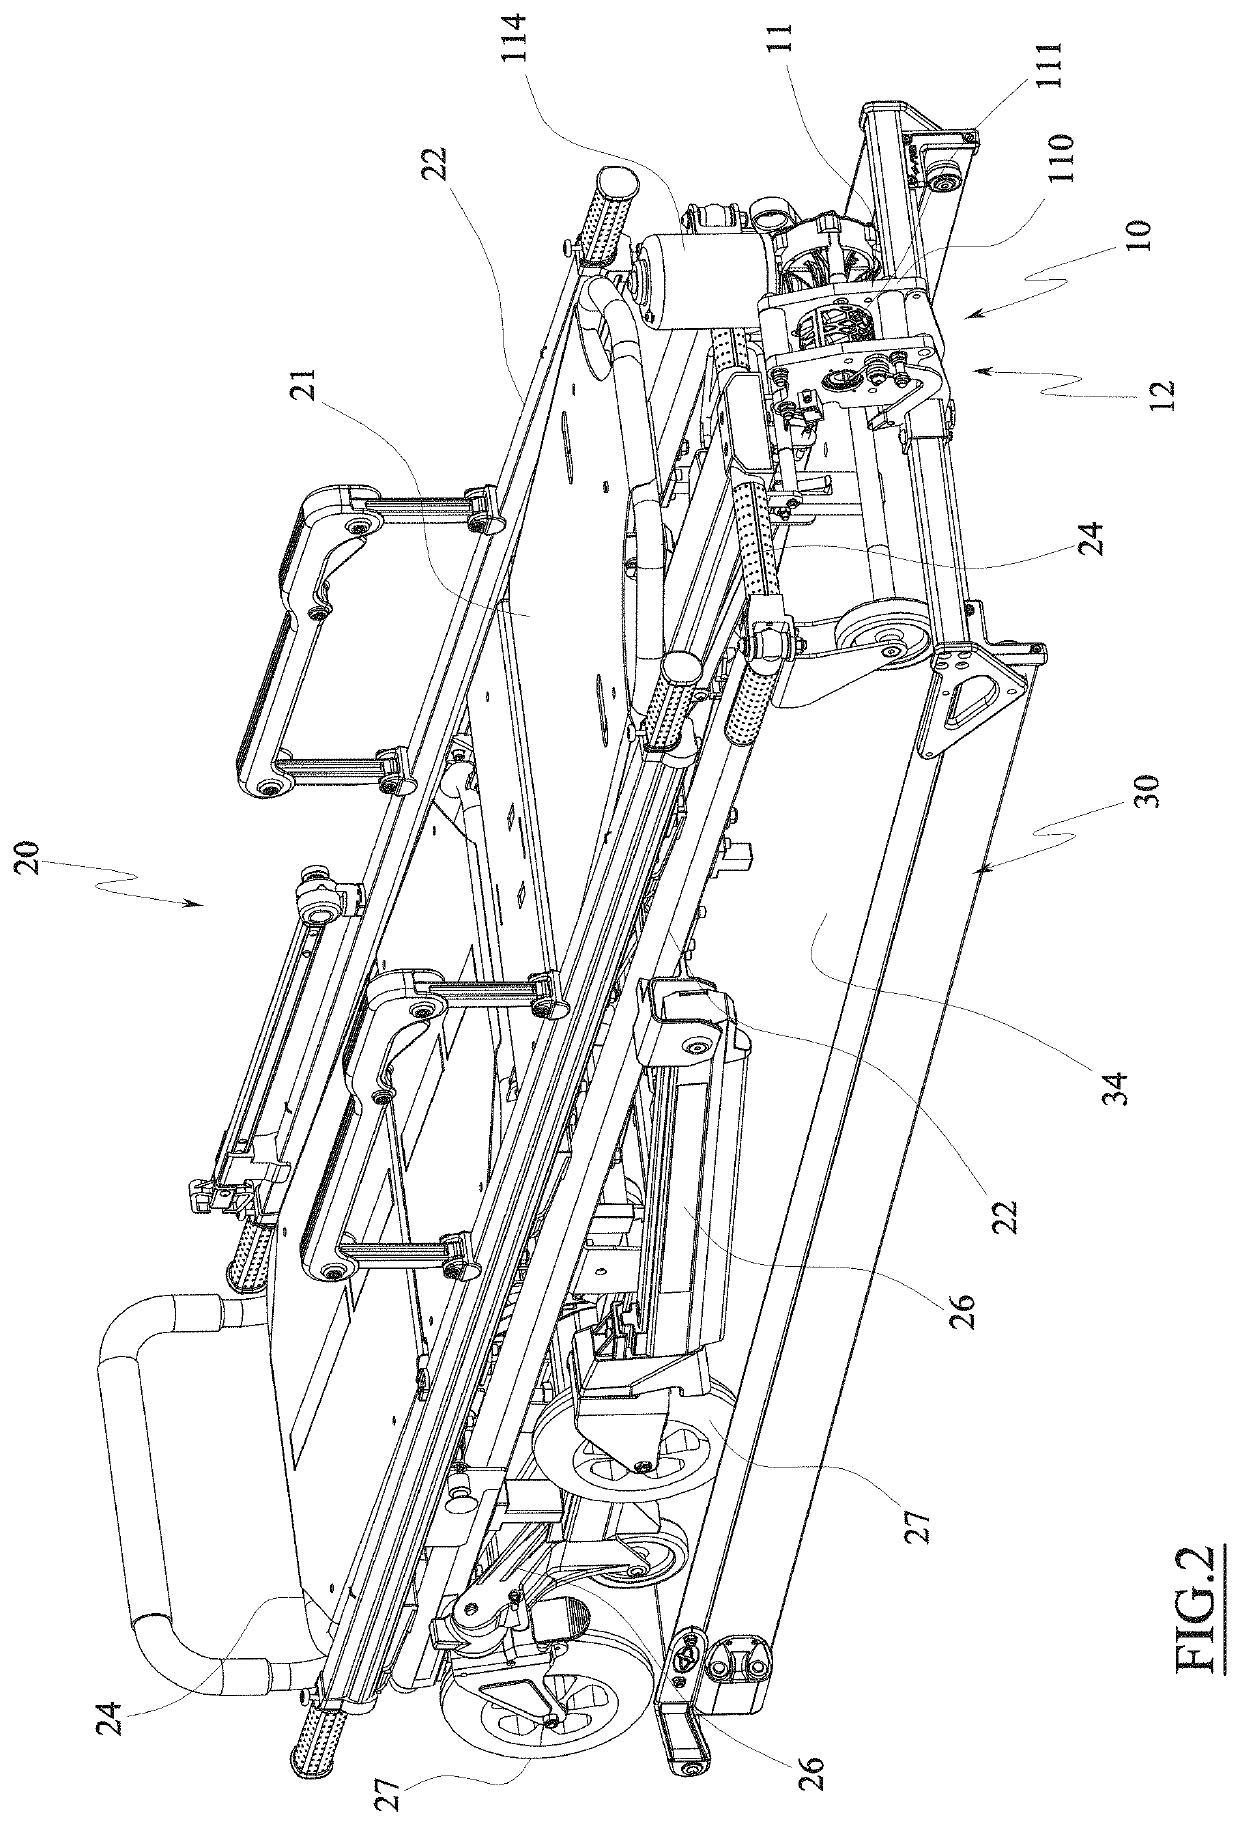 Auxiliary loading device of a stretcher